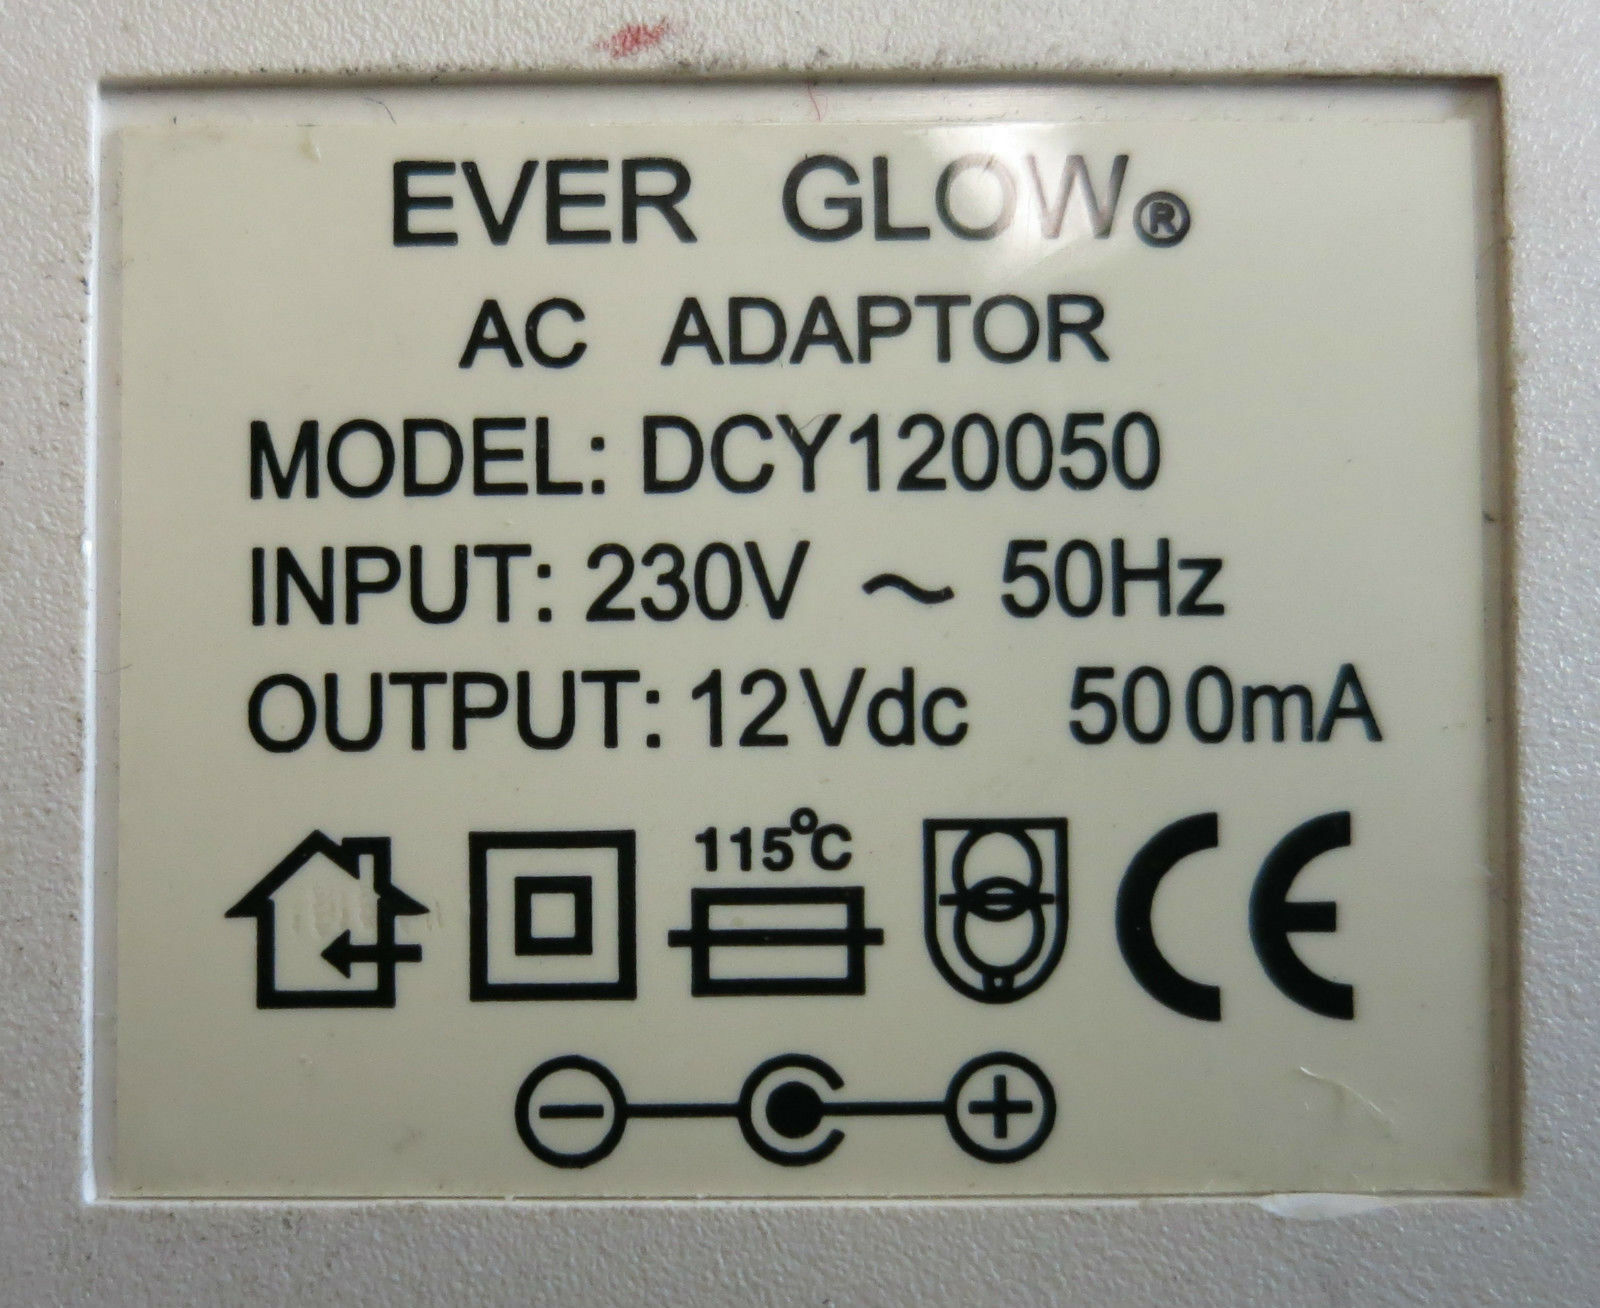 New 12V 500mA Ever Glow DCY120050 Class 2 Transformer Ac Adapter